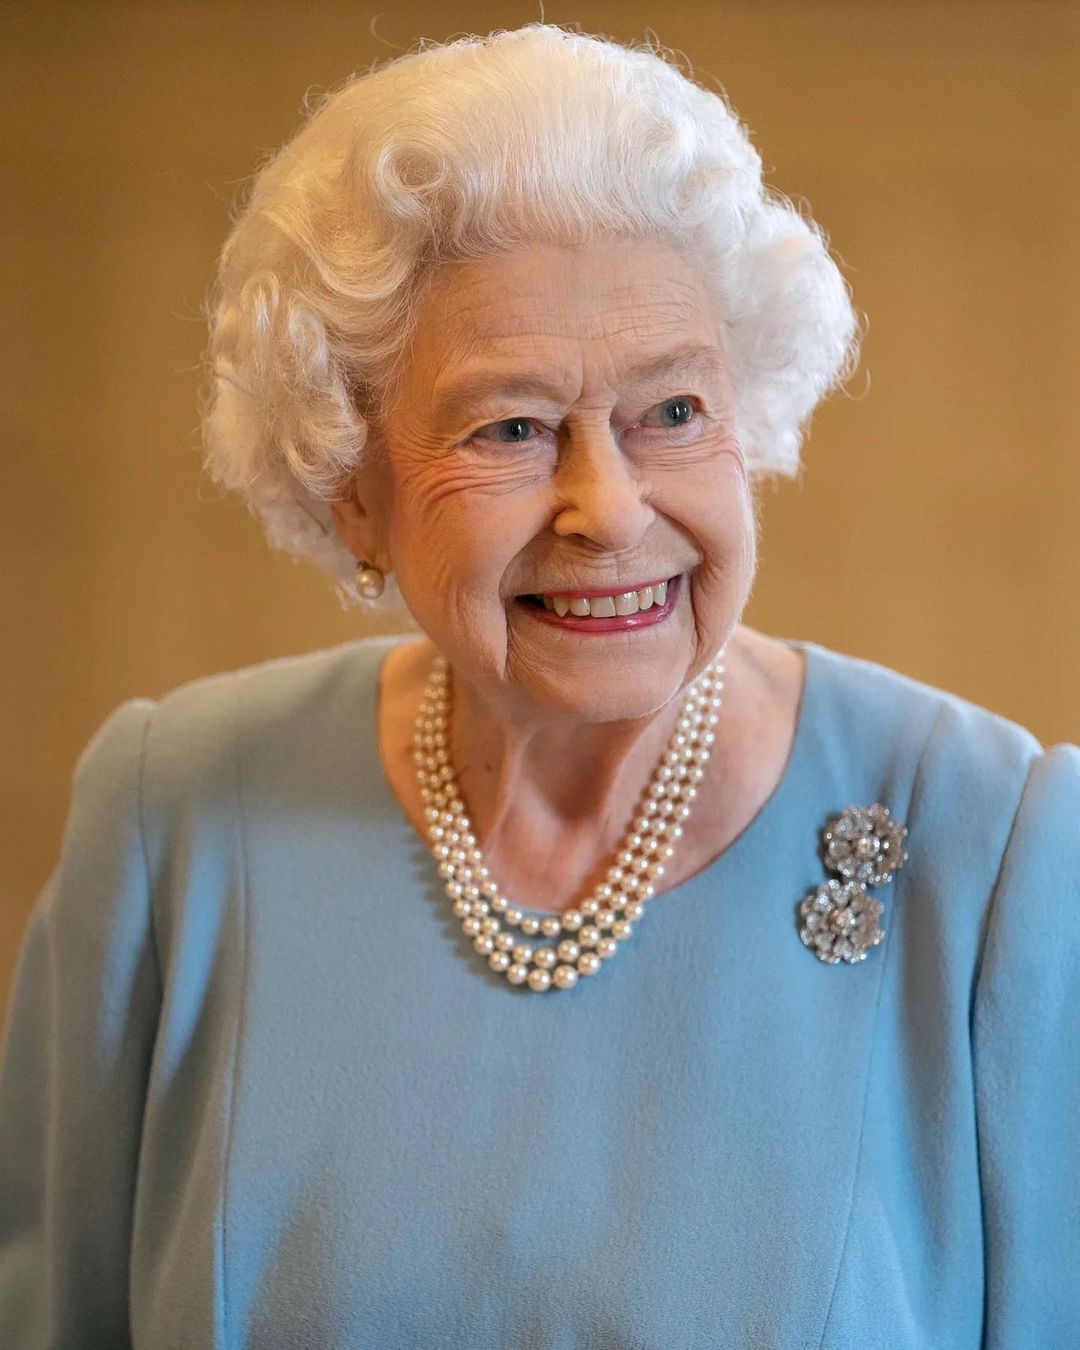 My thoughts and sympathies go to the Royal Family for the loss of their Mother, Grandmother, Aunt. Thank you to Her Majesty for her resolute never-ending service.  She is, and always will be the epitome of dignity and elegance.